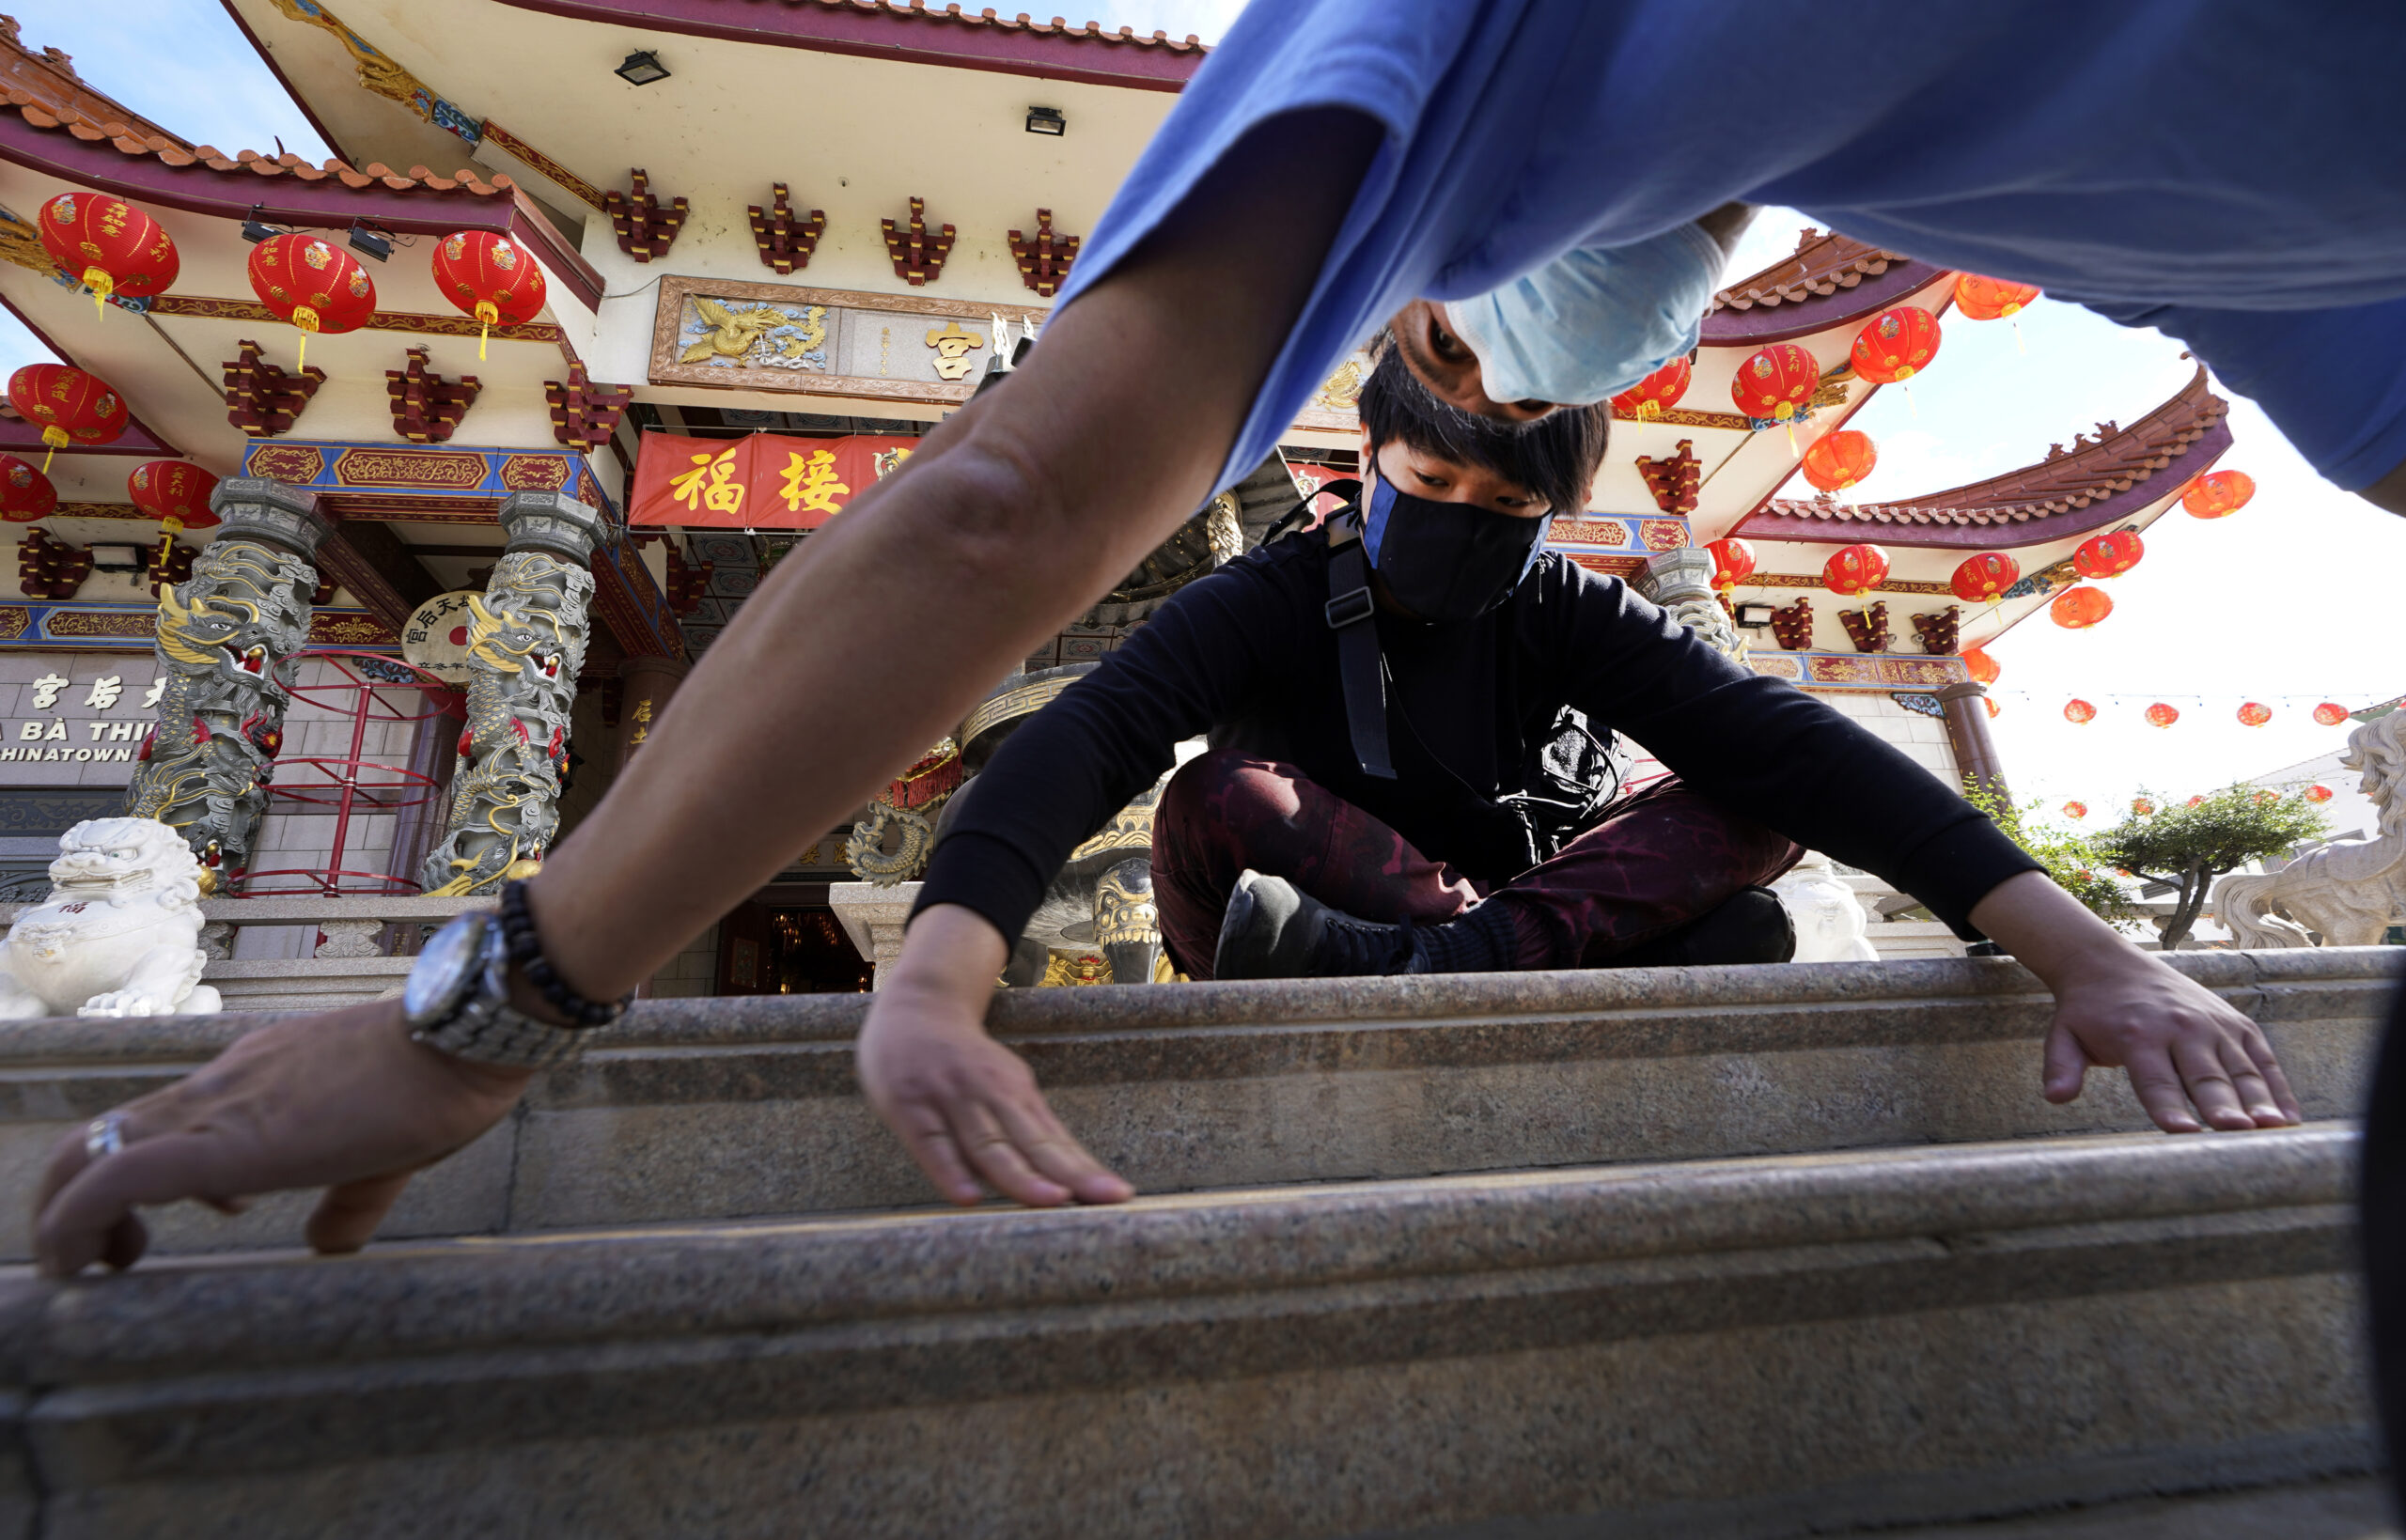 Volunteers, Alex Koi, foreground, and his son Lipsun Koi, 20, help install anti-slip tape on the front steps of the Thien Hau Temple ahead of the crowds expected for the Lunar New Year of the Tiger celebrations in the Chinatown district of Los Angeles, Friday, Jan. 28, 2022. The Lunar New Year of the Tiger celebrations will occur on Feb. 1, amid warnings against travel and large gatherings due to COVID-19. (AP Photo/Damian Dovarganes)